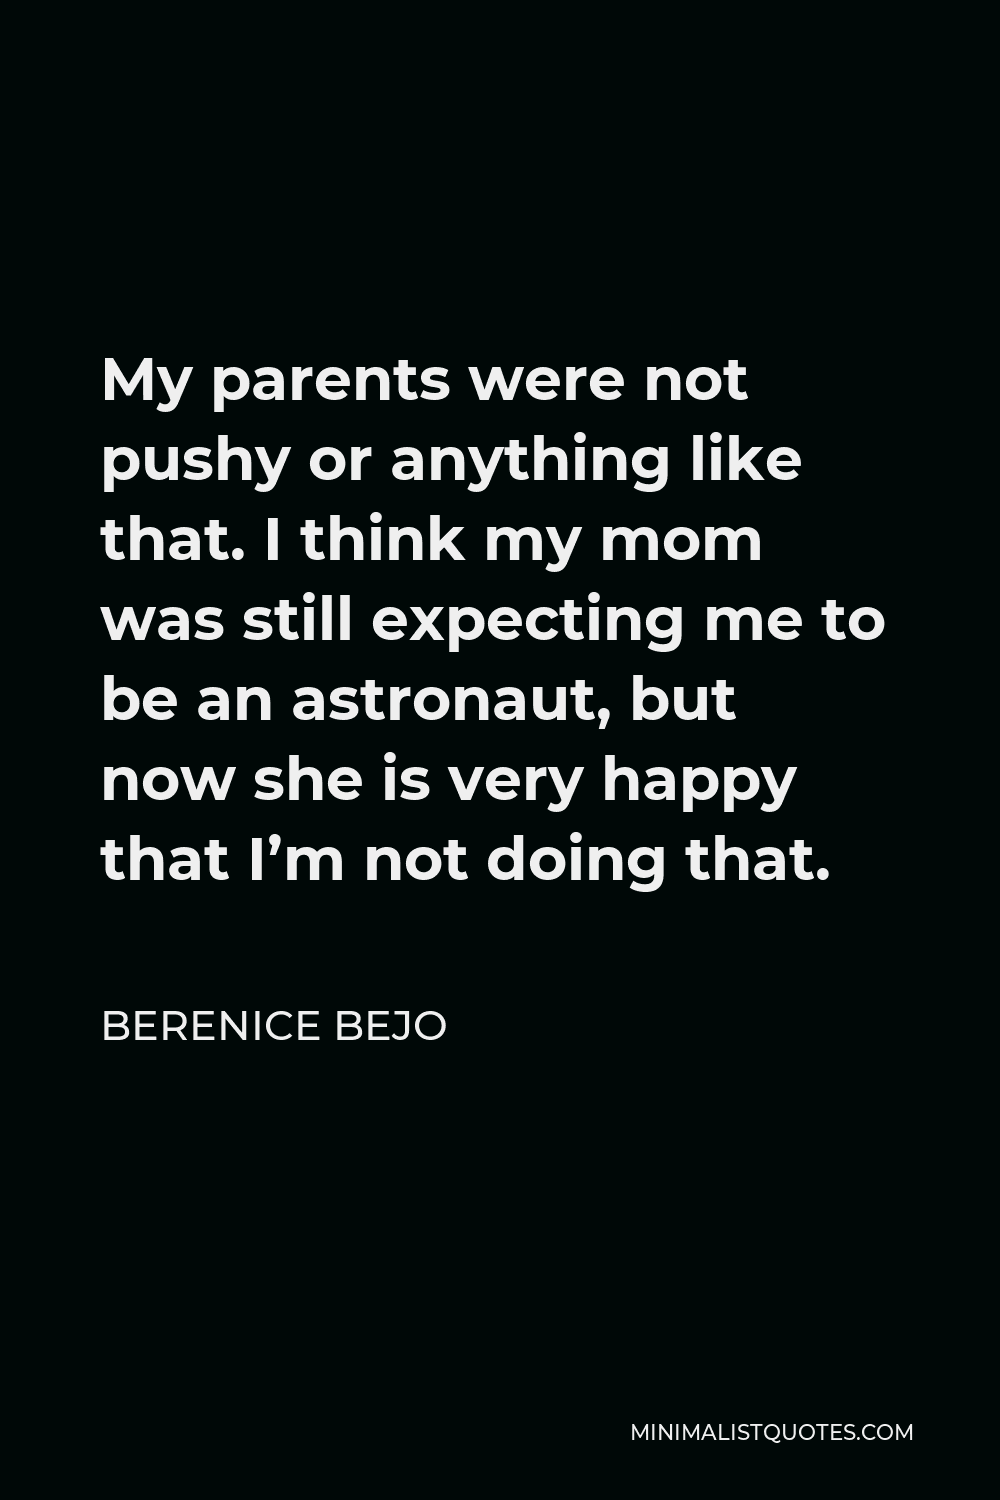 Berenice Bejo Quote - My parents were not pushy or anything like that. I think my mom was still expecting me to be an astronaut, but now she is very happy that I’m not doing that.